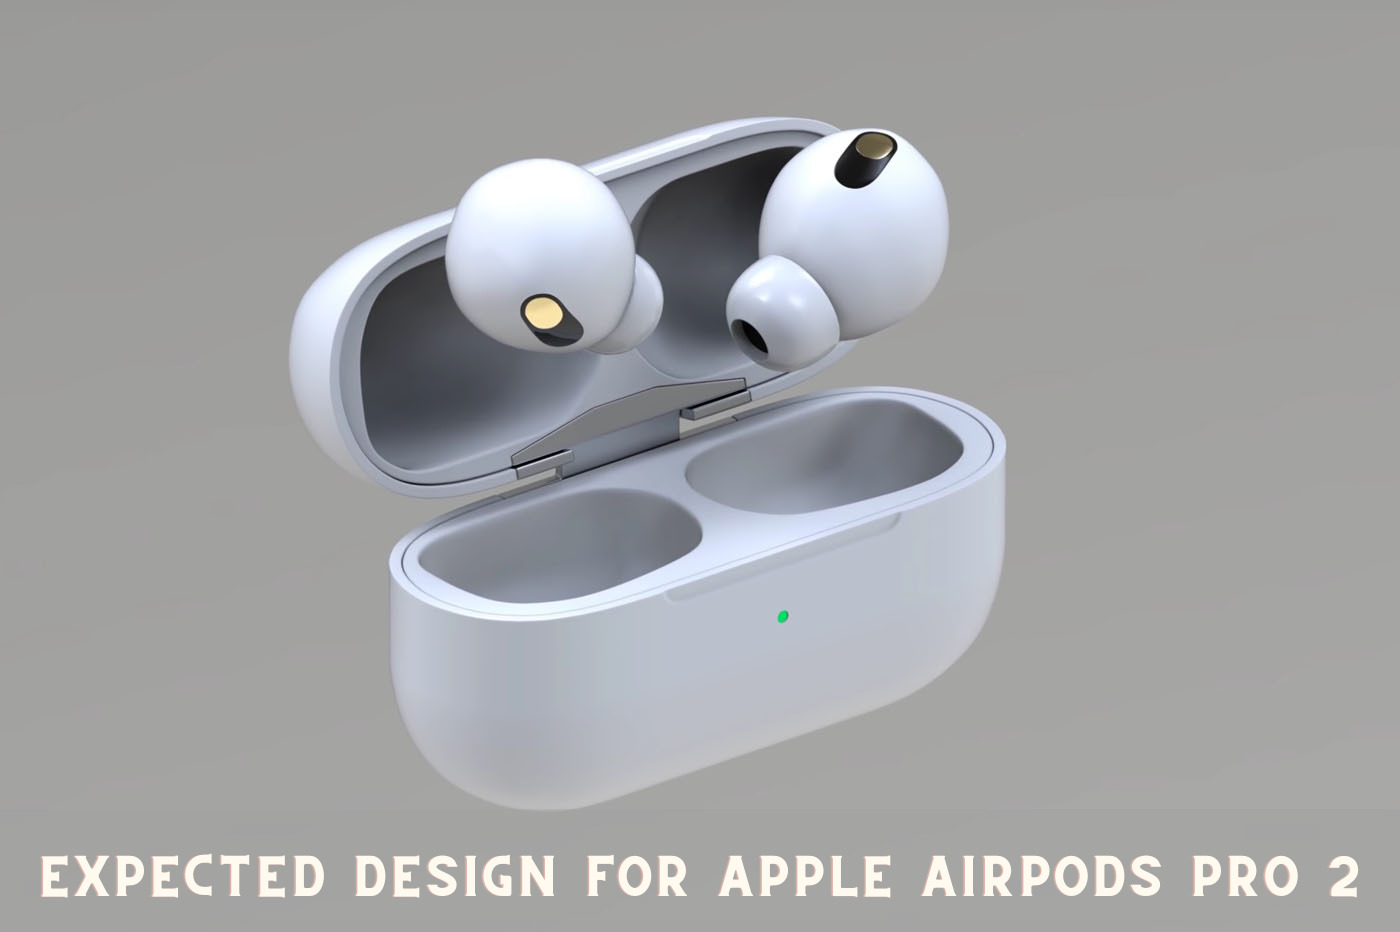 Expected Design for Apple AirPods Pro 2